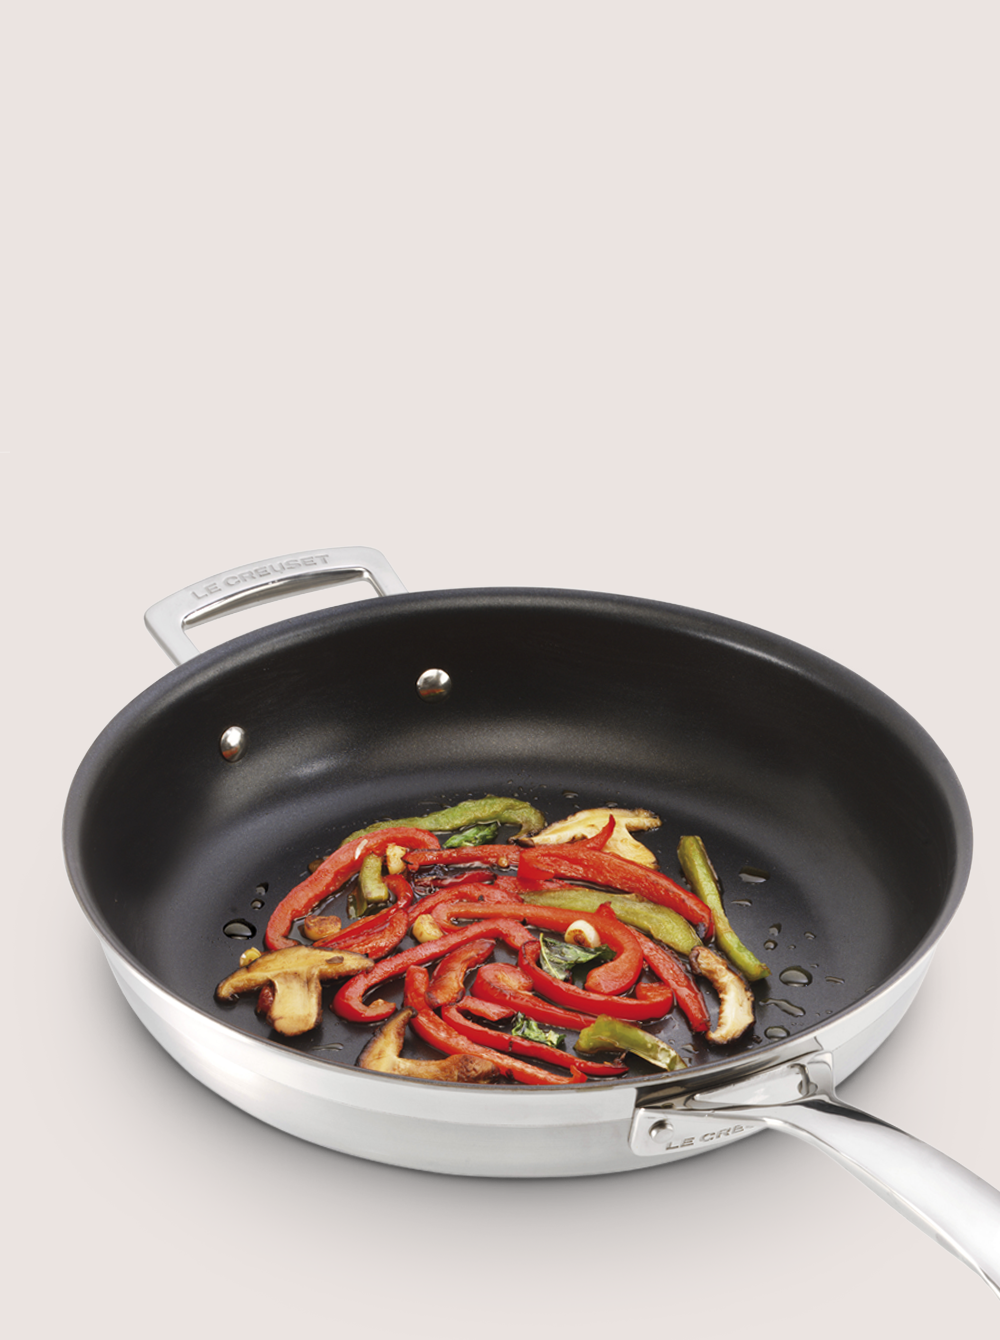 How to Clean Cookware feat. Le Creuset and Stainless Steel, #Spotless